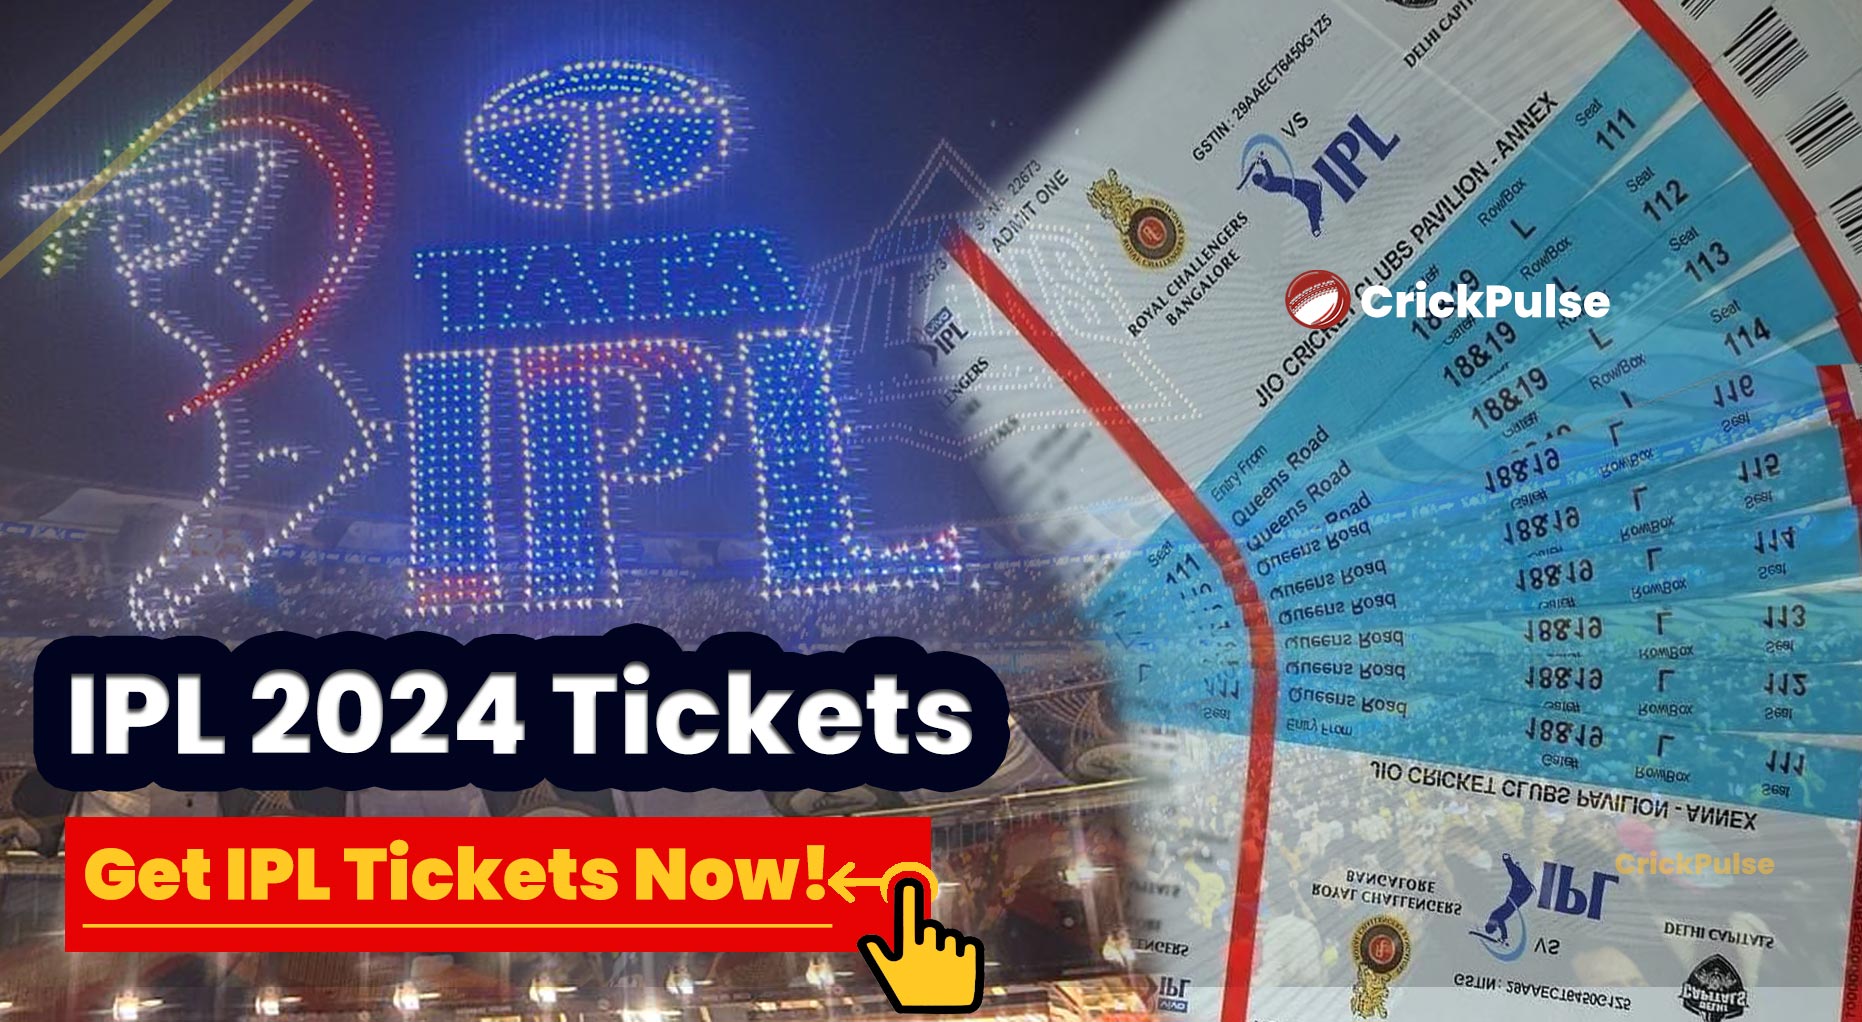 Booking IPL 2024 Tickets Online A StepbyStep Guide